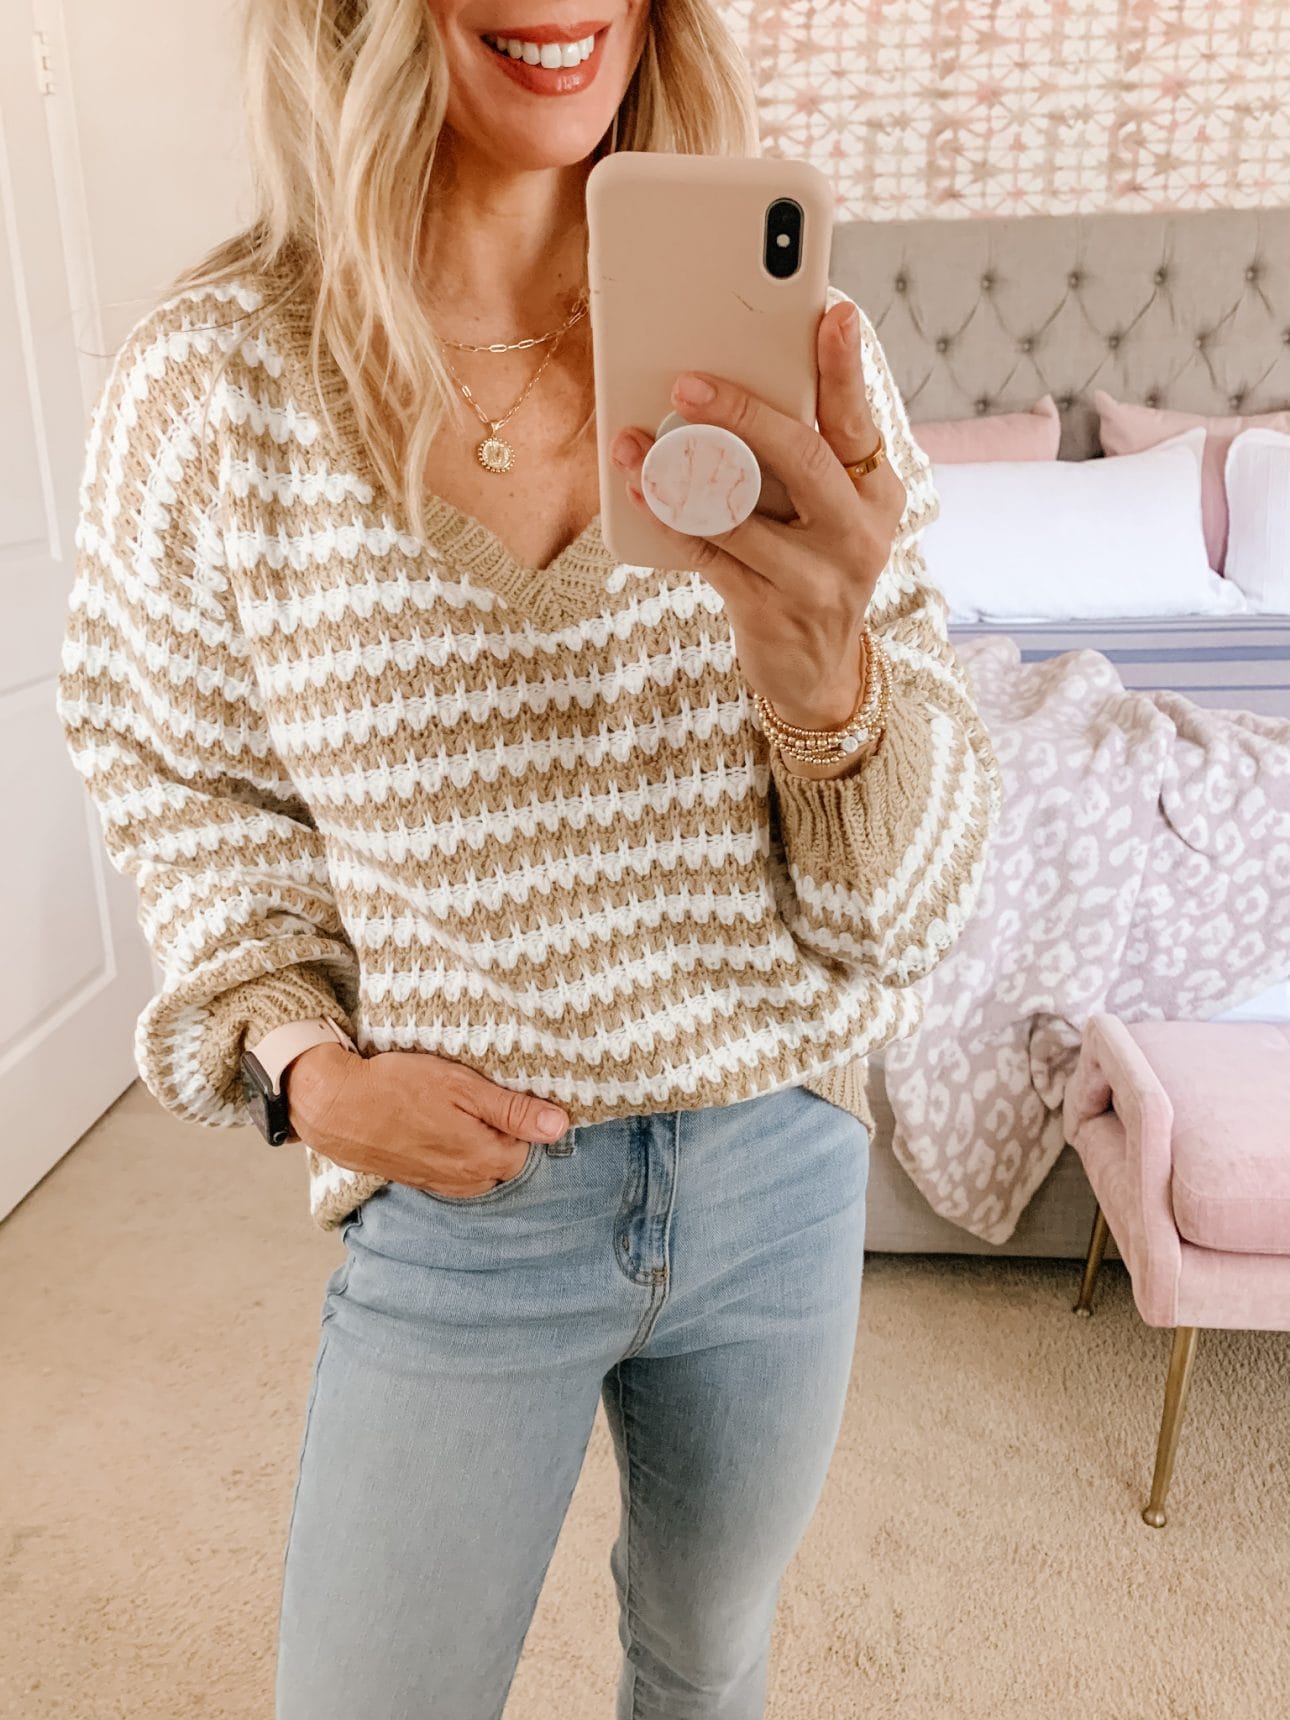 Amazon Fashion, Striped Sweater, Jeans, Booties 